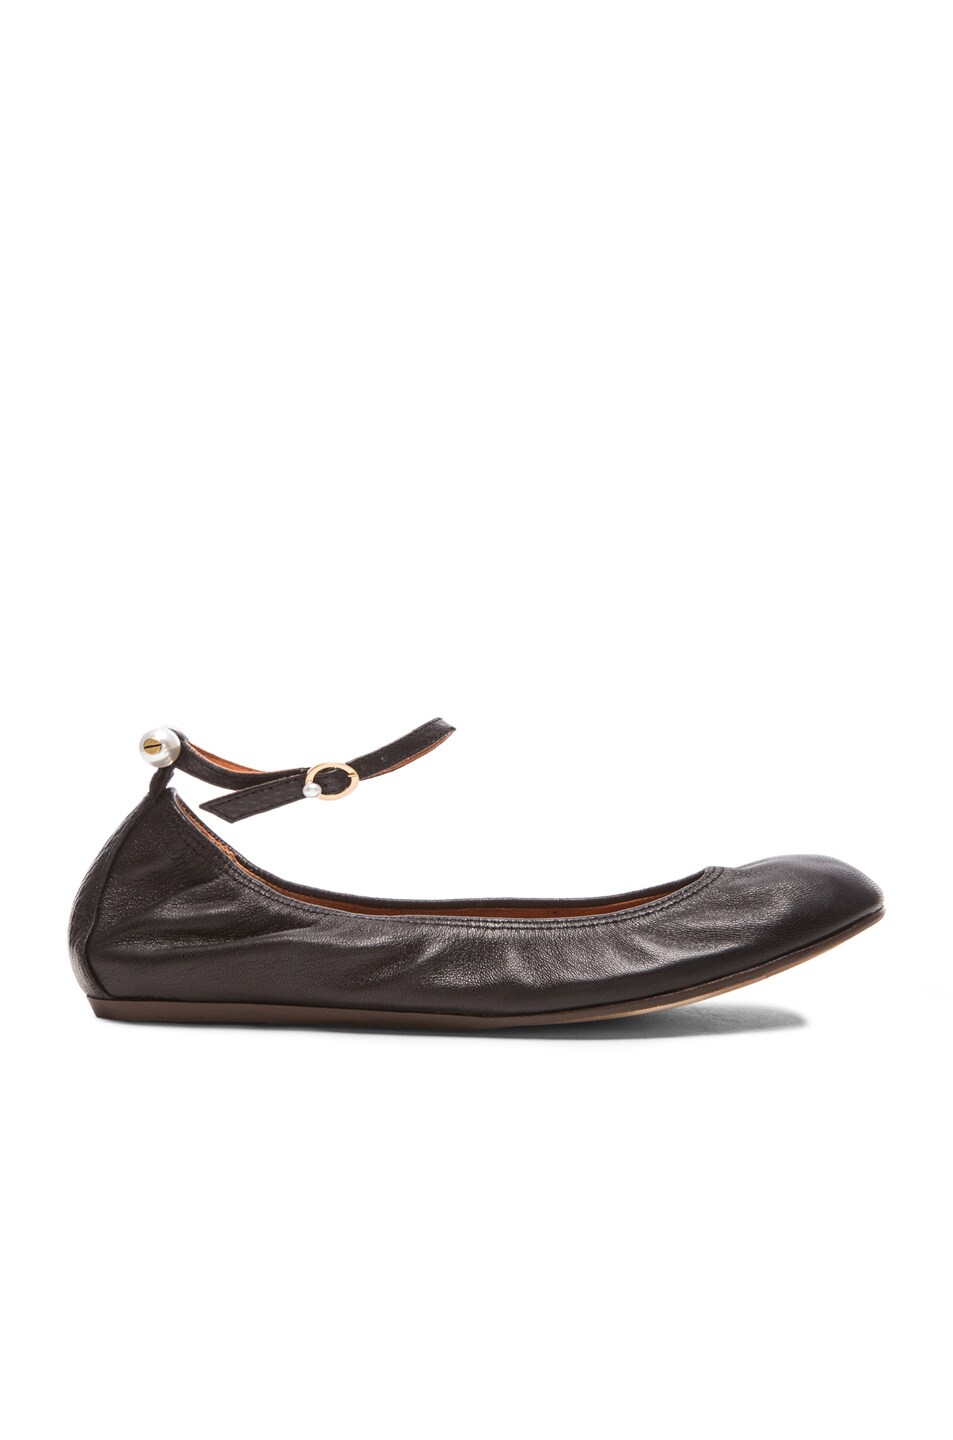 Image 1 of Lanvin Ankle Strap Ballerina Lambskin Flats with Pearls in Black